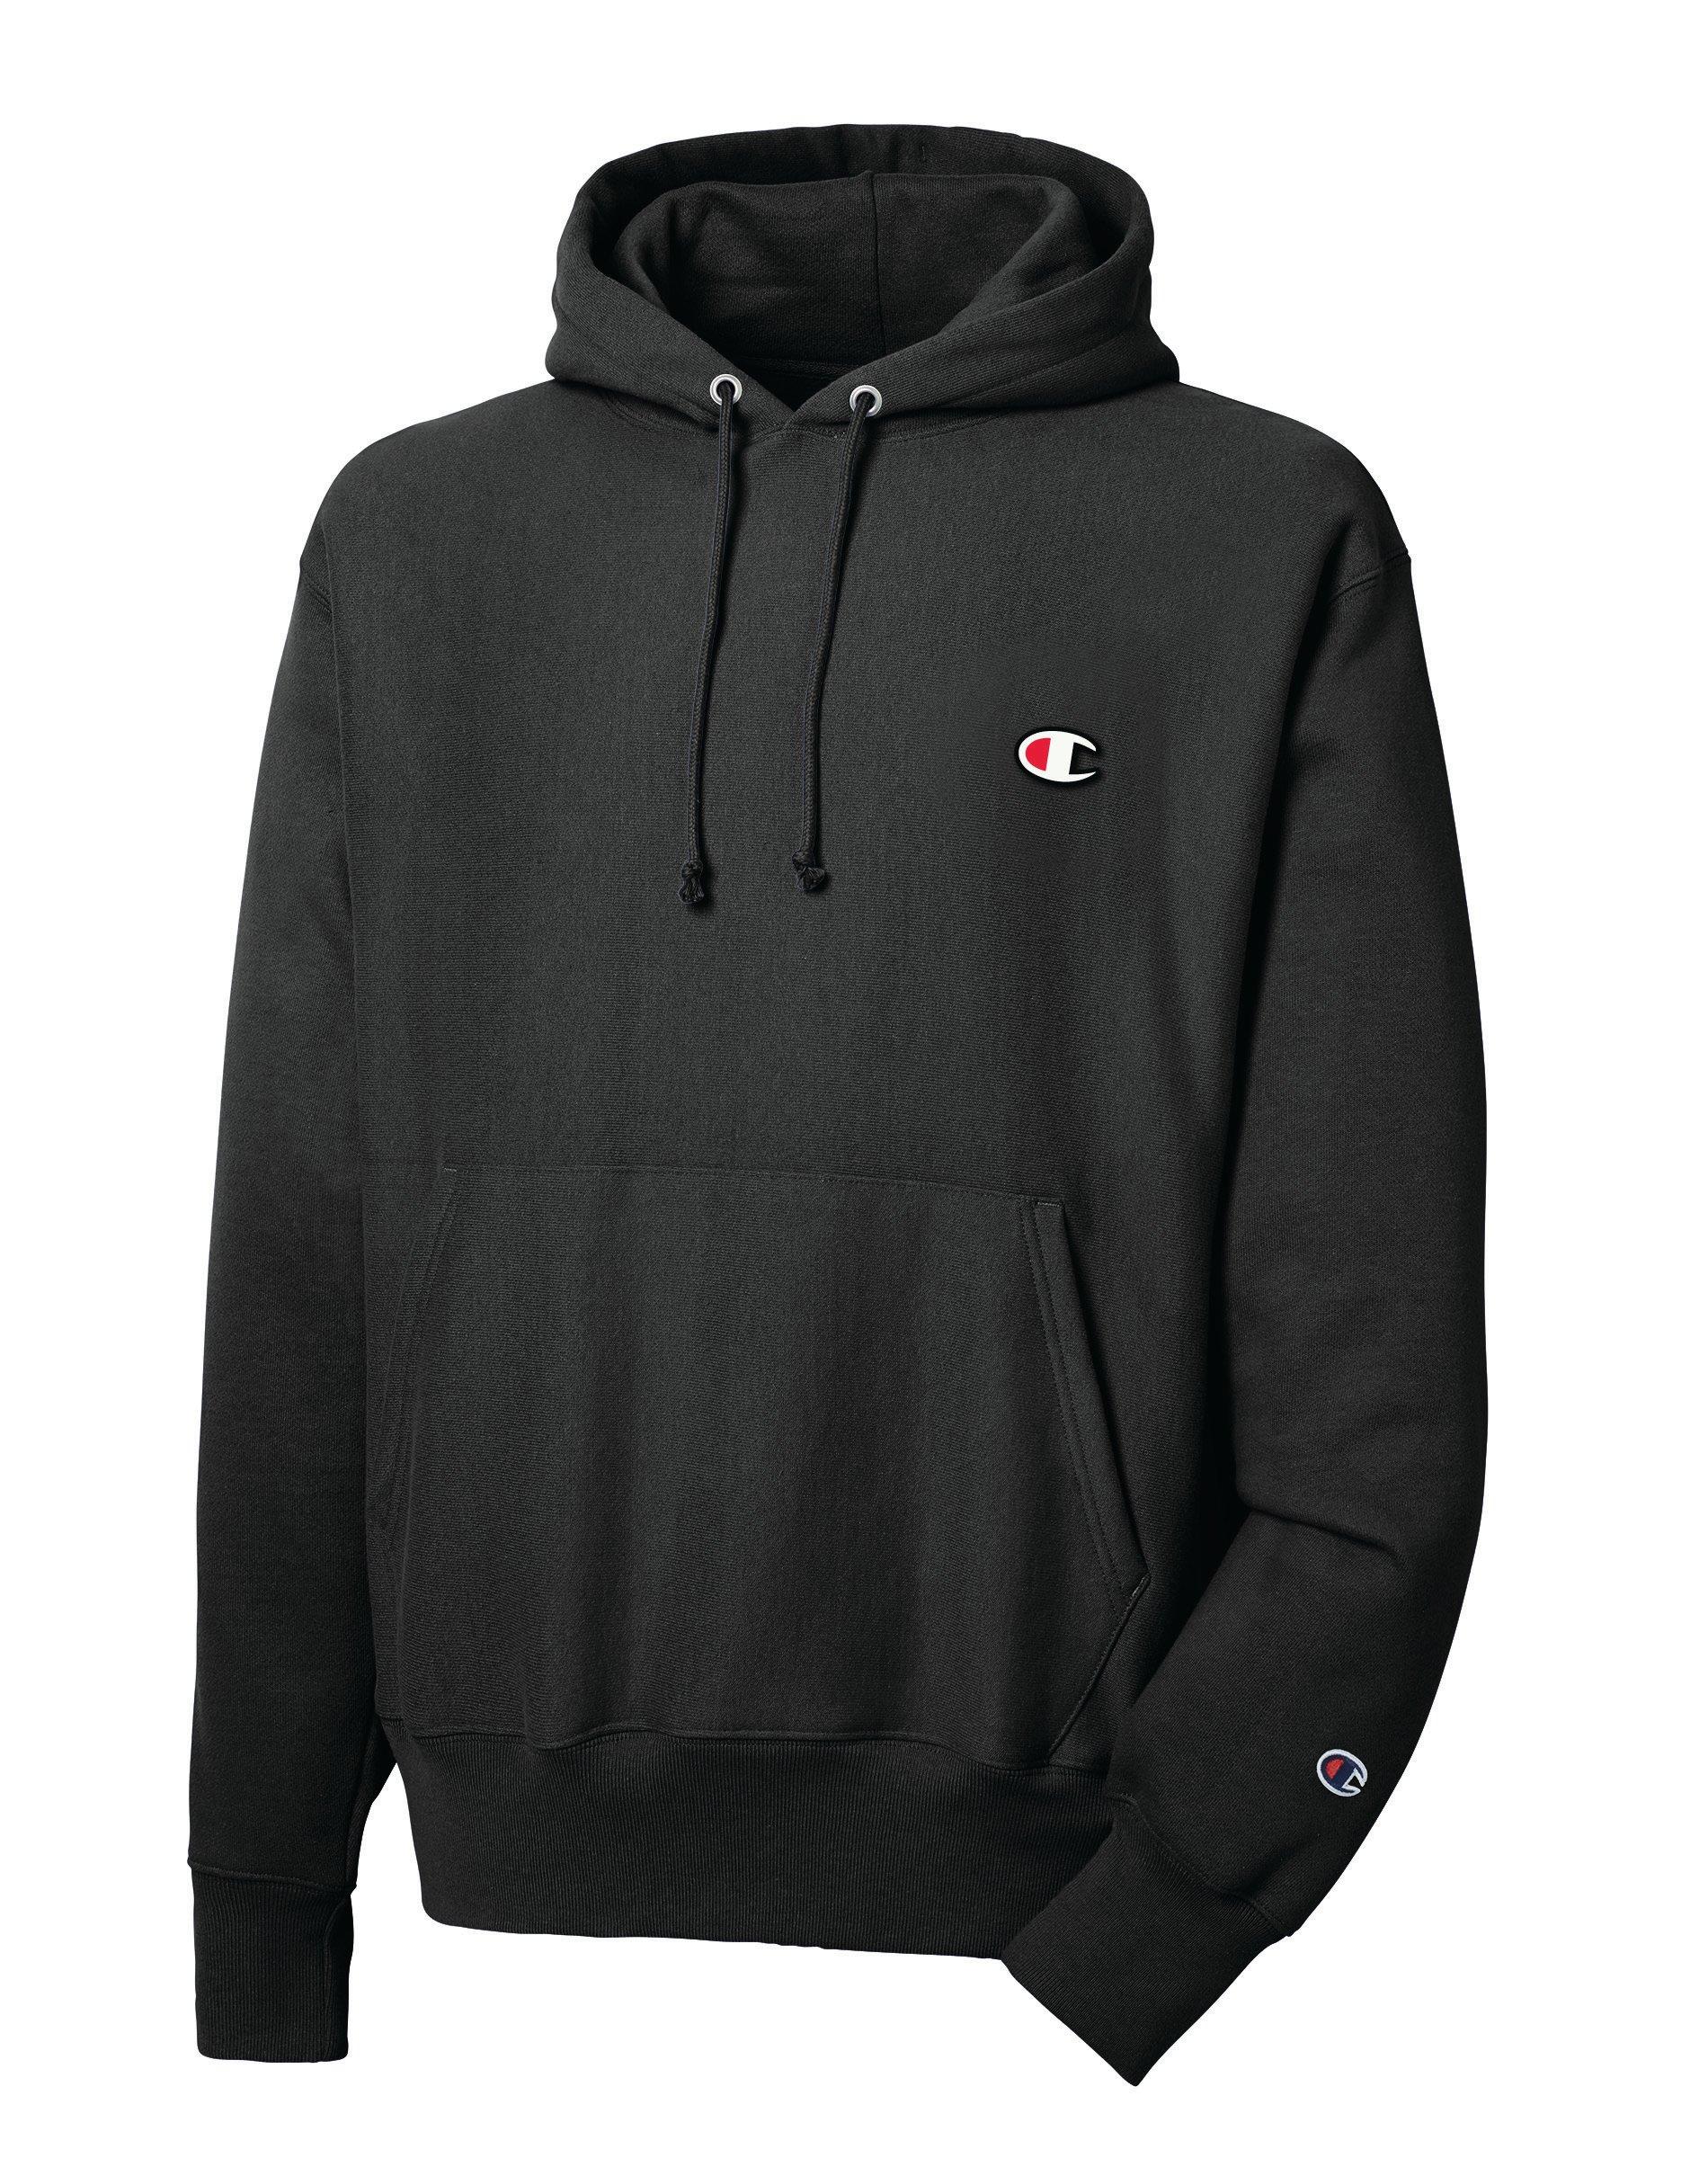 Men's Reverse Weave Pullover Hoodie from Champion | Team